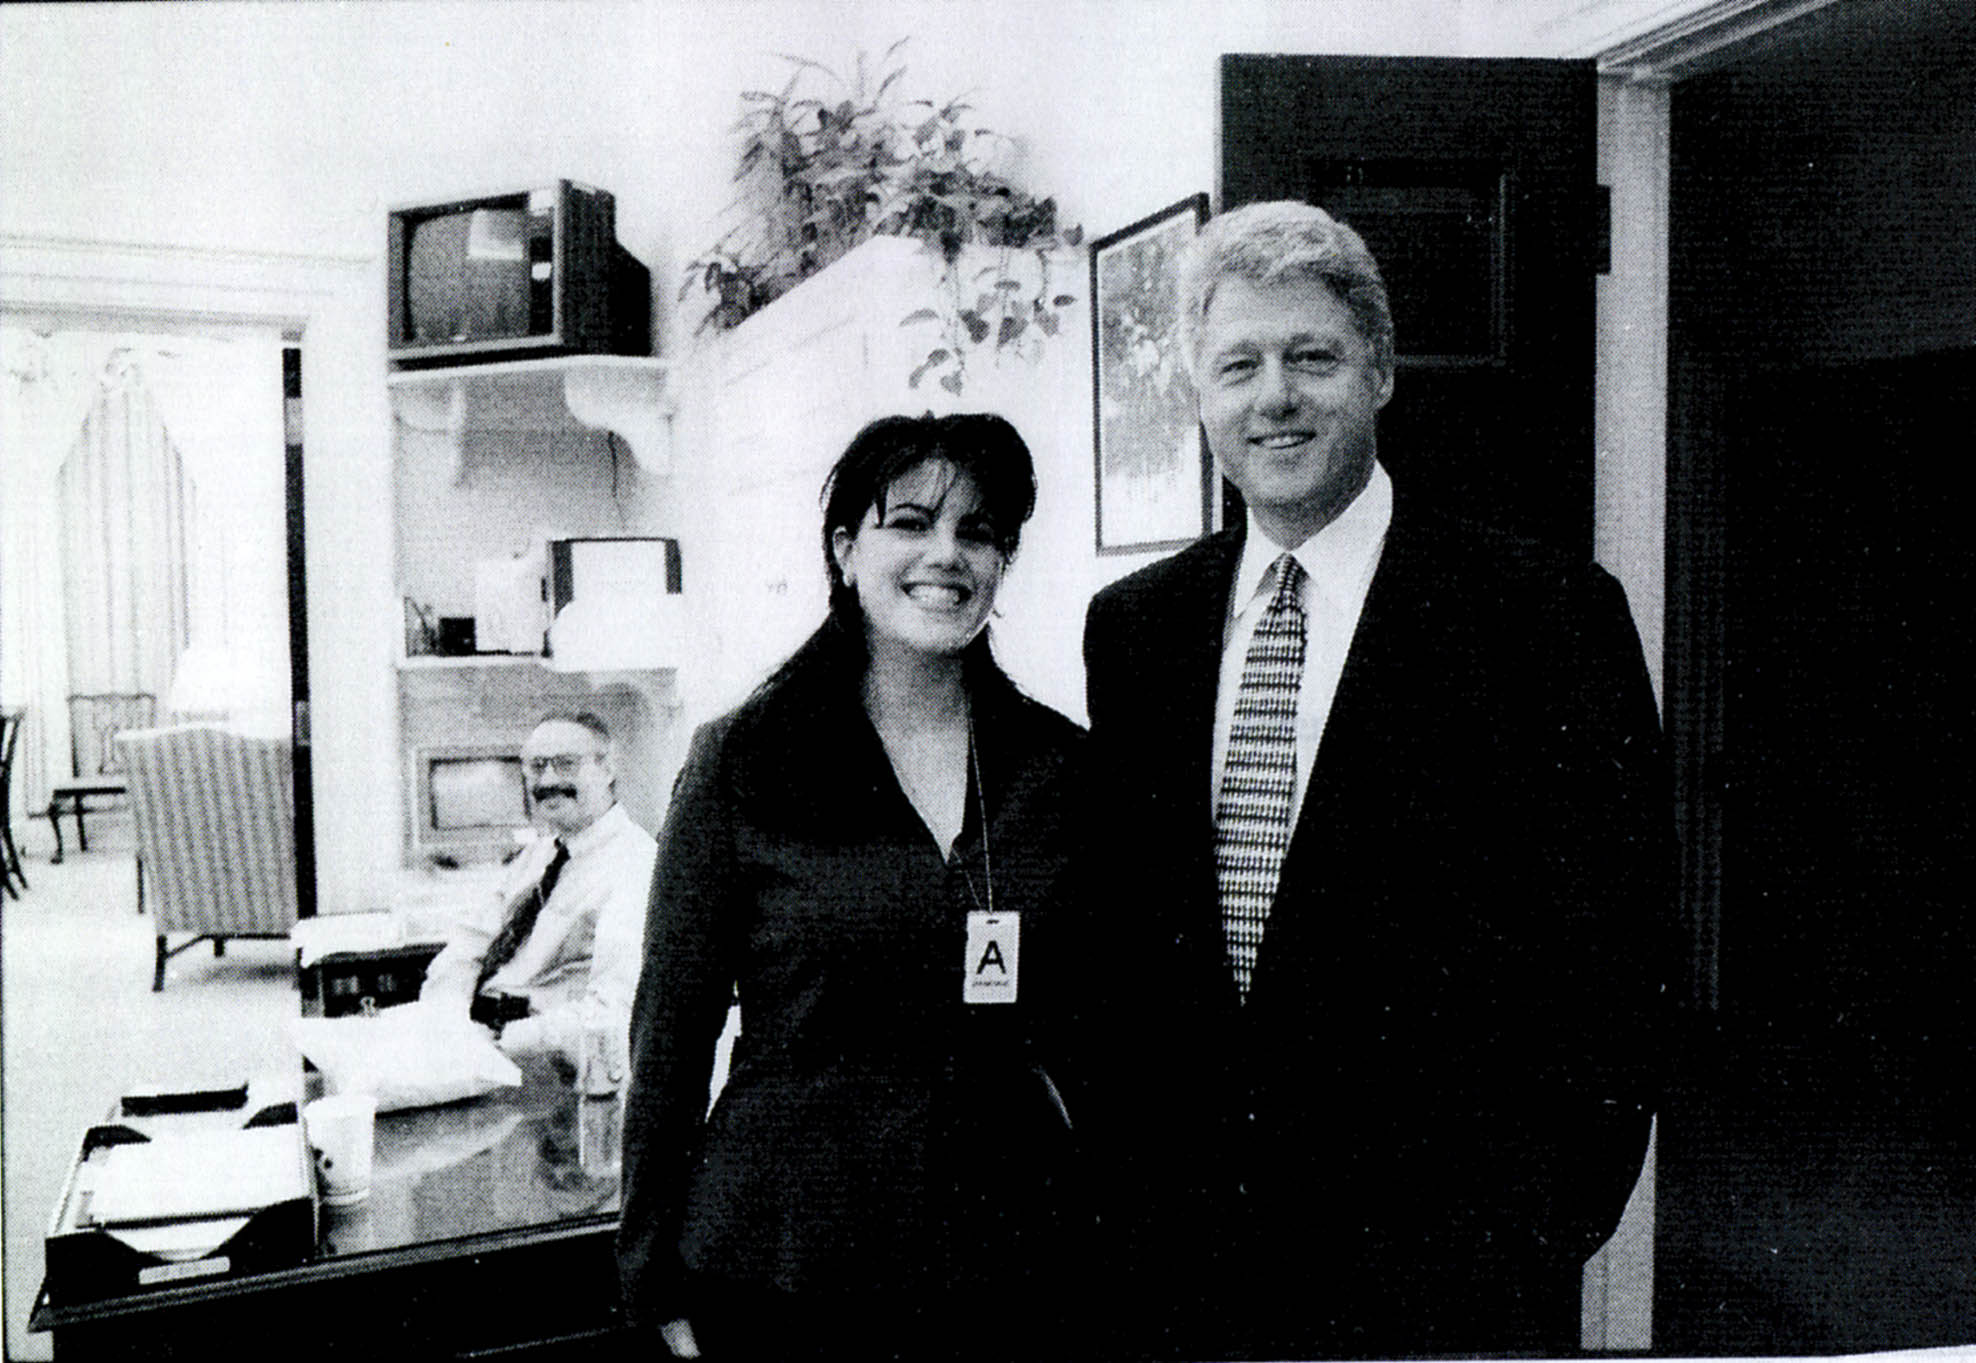 PHOTO: A photograph showing former White House intern Monica Lewinsky meeting President Bill Clinton at a White House function submitted as evidence in documents by the Starr investigation and released by the House Judicary committee Sept. 21, 1998.